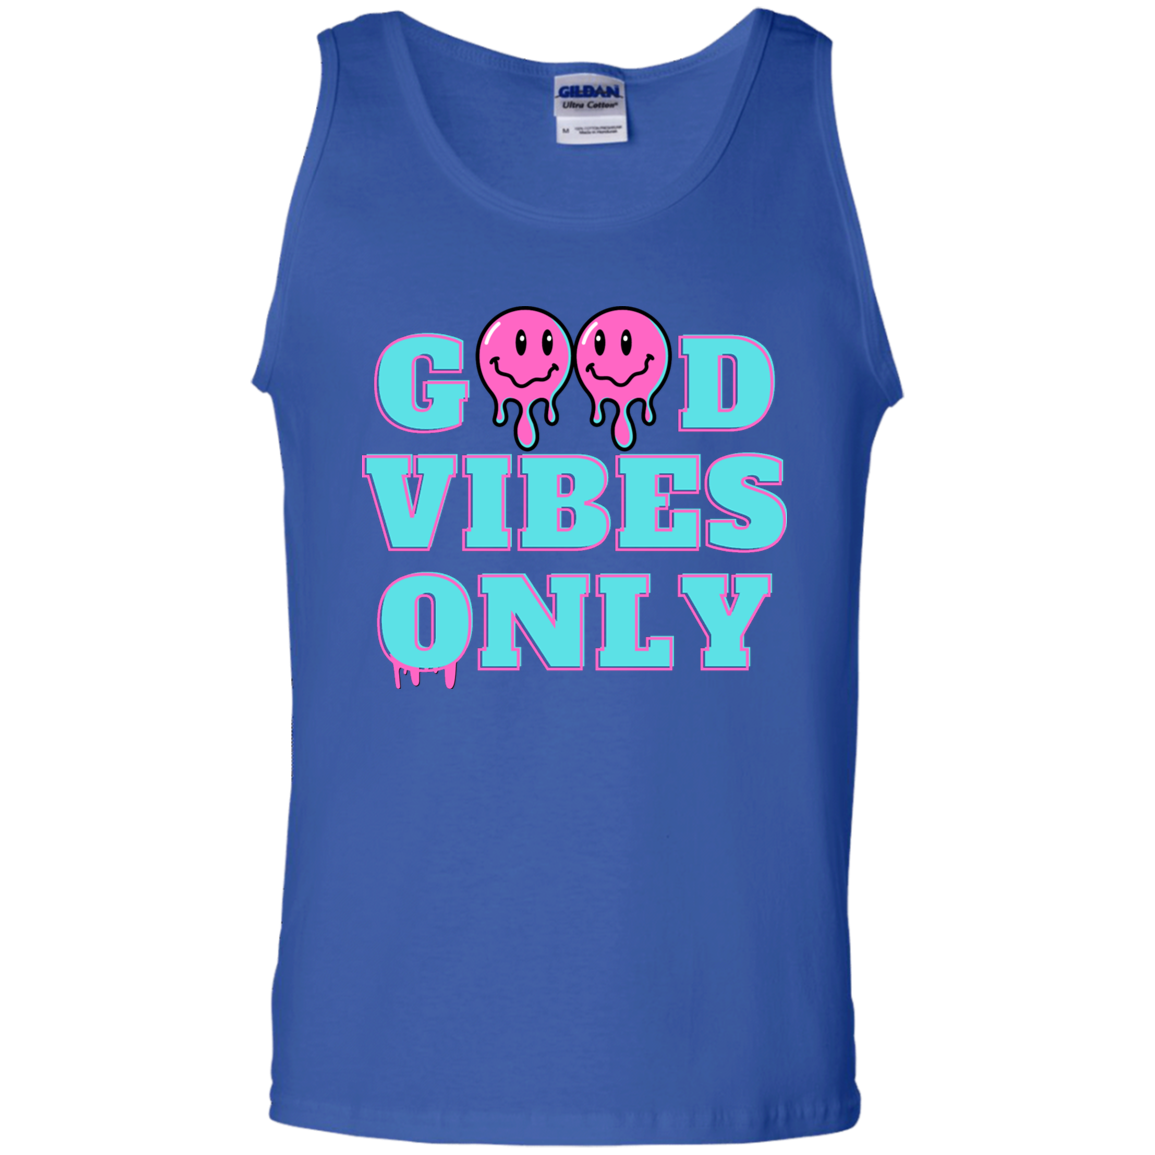 Good Vibes Only - Men's Tank Top